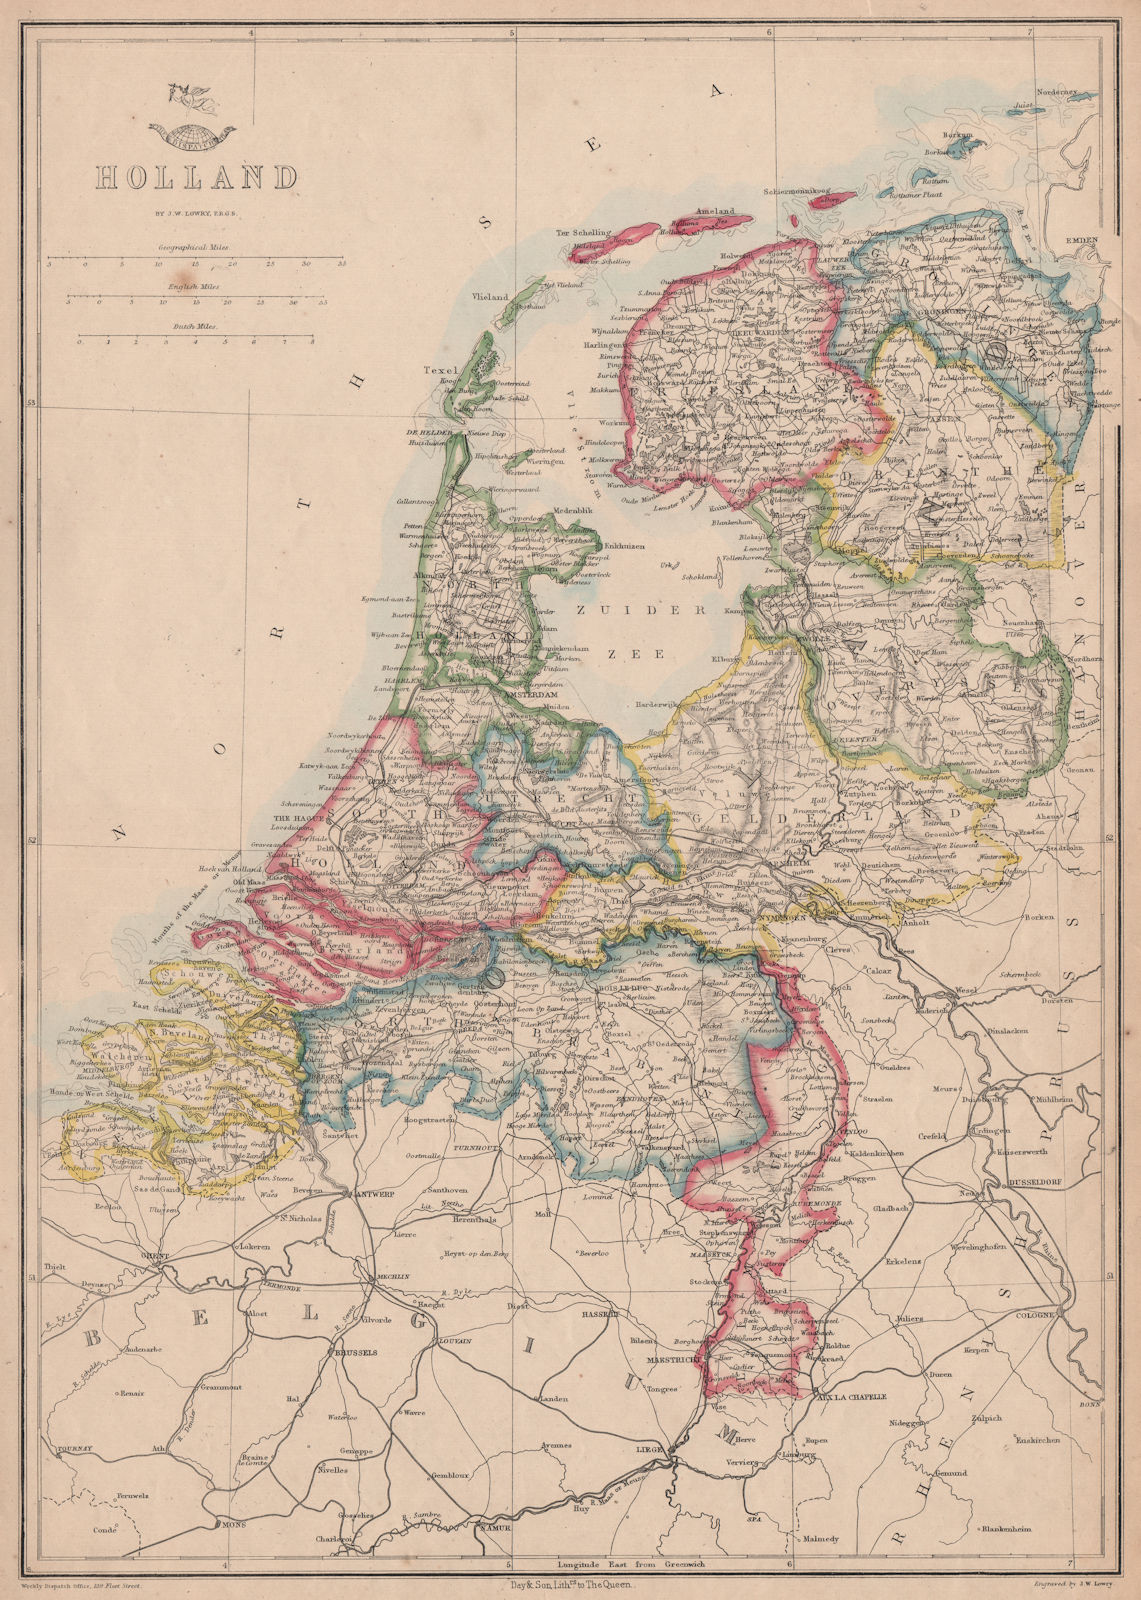 Associate Product 'Holland'. Netherlands in provinces. JW LOWRY for the Dispatch atlas 1862 map